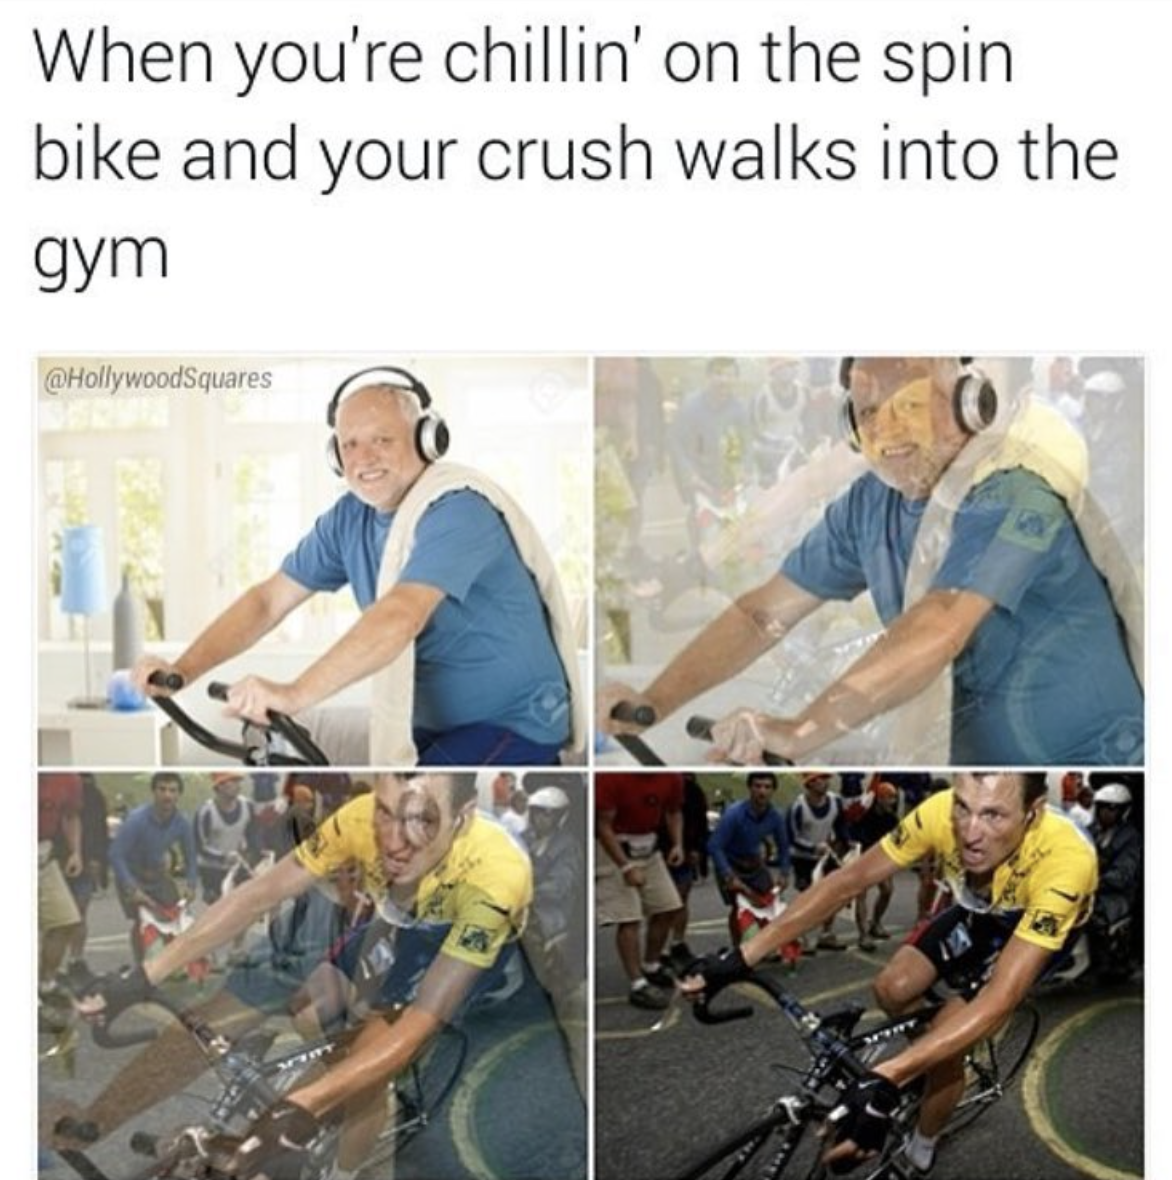 spinning bike meme - When you're chillin' on the spin bike and your crush walks into the gym Hollywood Squares